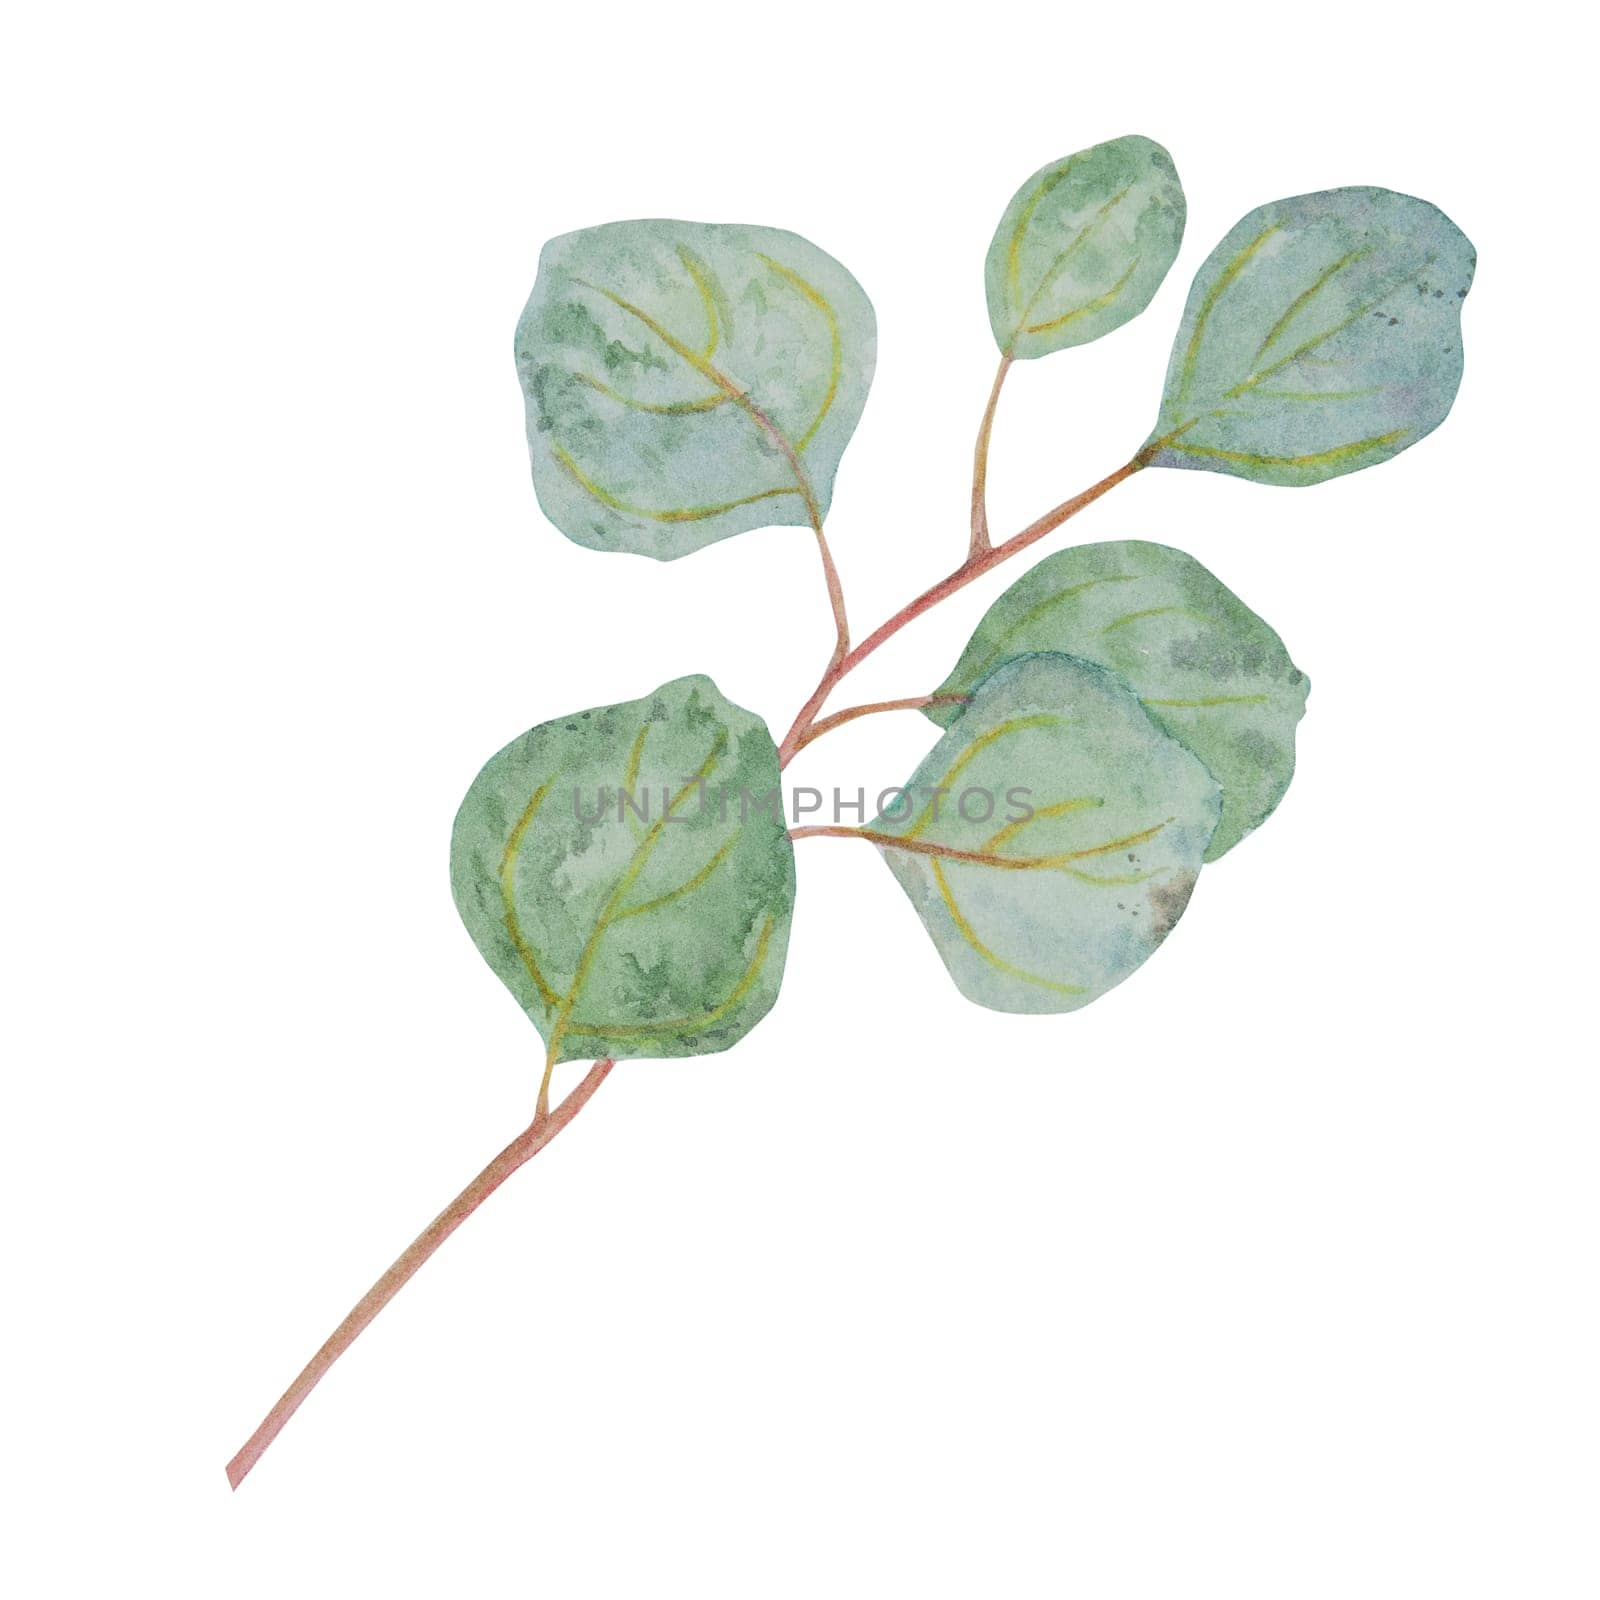 Eucalyptus branch watercolor hand drawn floral illustration. Botanical painting of greenery leaves are isolated. Good as an element in the decorative design of invitation, wedding, greeting cards, textile. Tropical plant, tree branch on the white background. Eucalyptus populus.